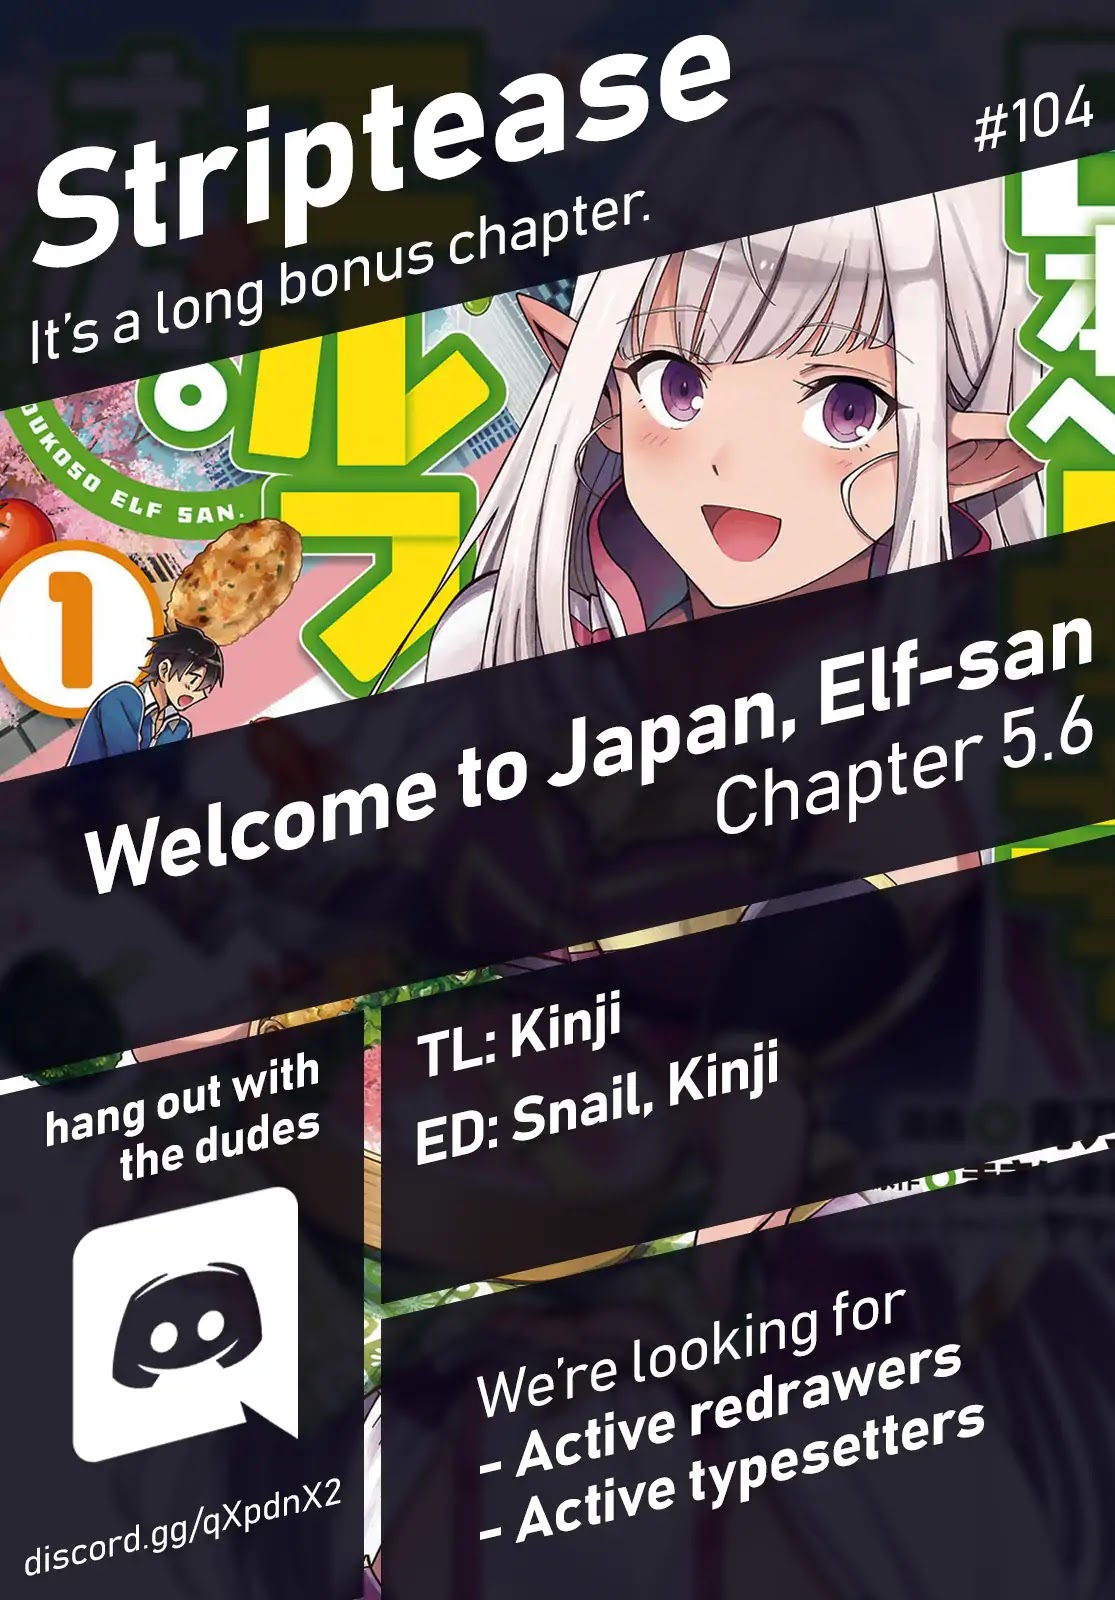 Welcome To Japan, Elf-San Chapter 5.6 #1